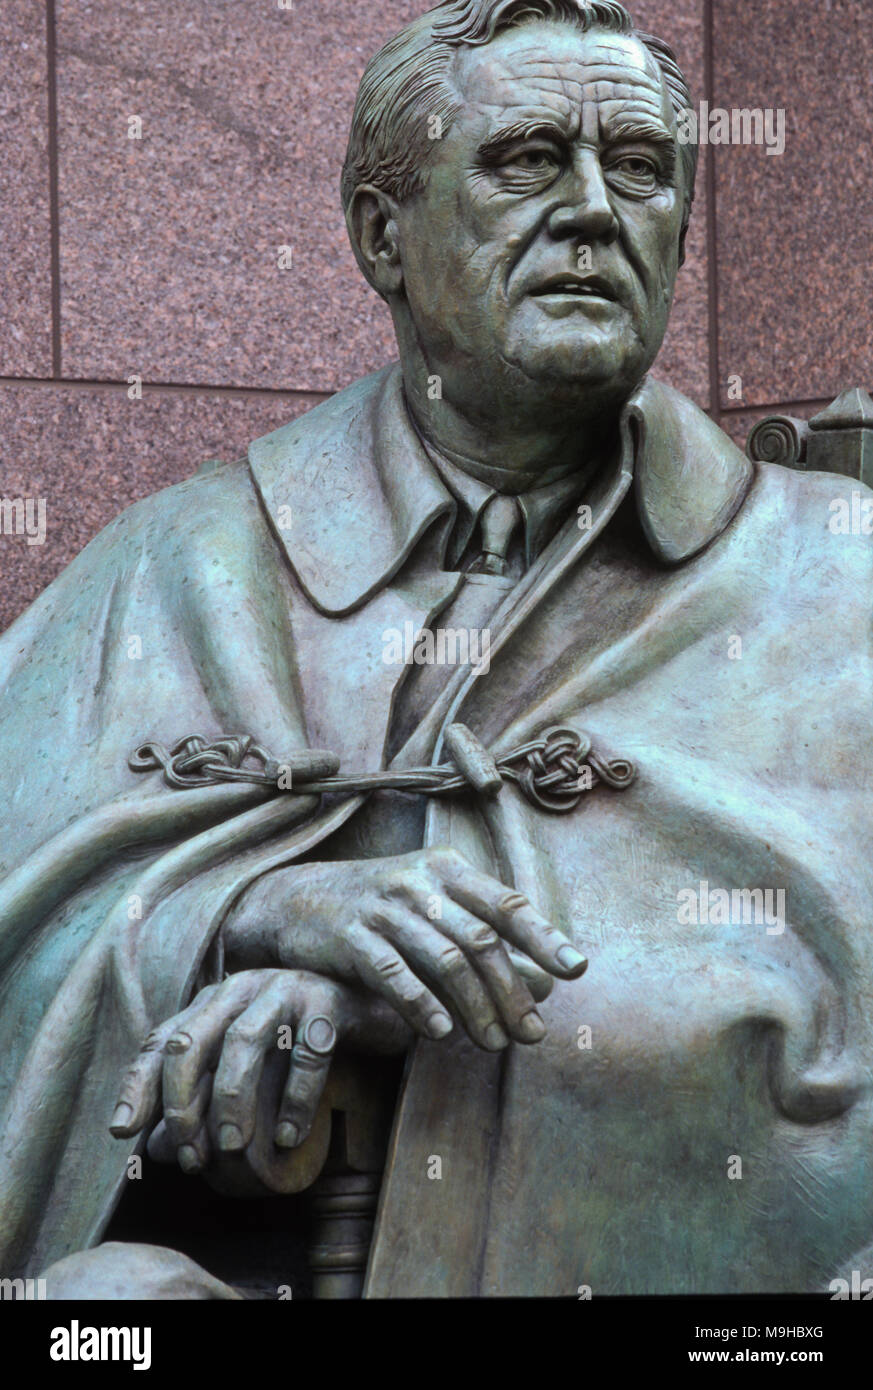 WASHINGTON, DC, USA - 1997/04/23: Statue of Franklin Delano Roosevelt by sculpture Neil Estern at the Roosevelt Memorial and FDR Monument on the Tidal Basin during the commemoration and unveiling of the site April 23, 1997 in Washington, DC.     (Photo by Richard Ellis) Stock Photo